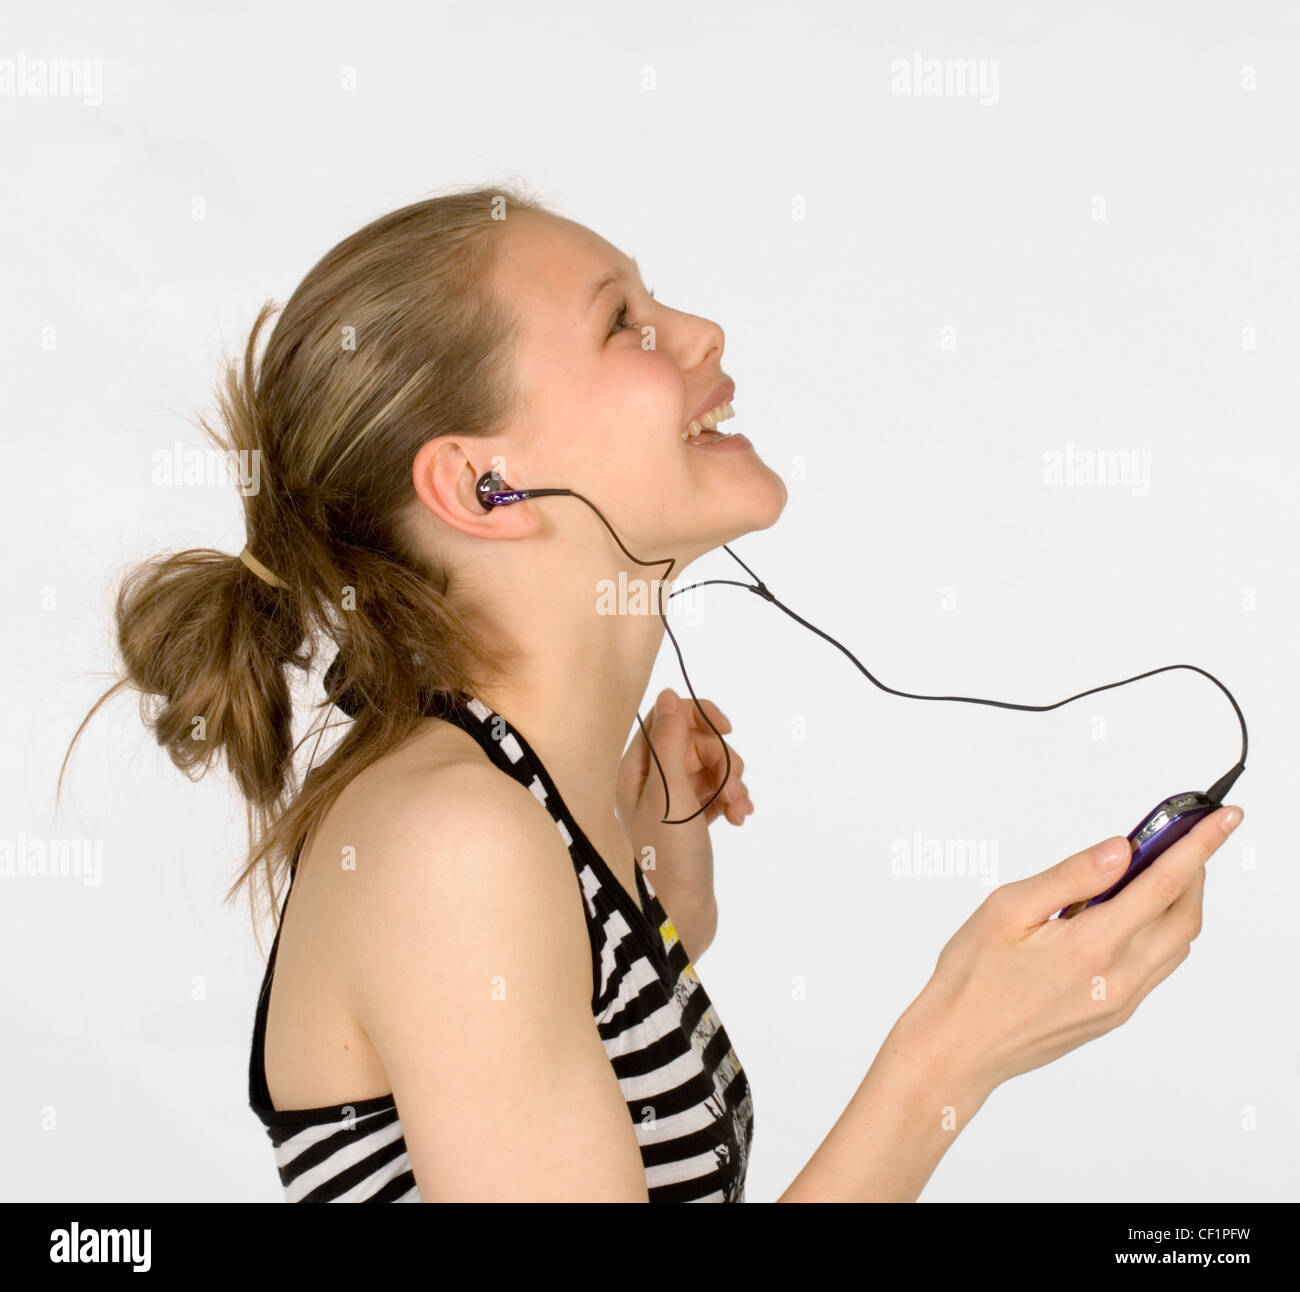 Teenager listening to music. Portable audio devices have revolutionised the way people buy and listen to music. Stock Photo